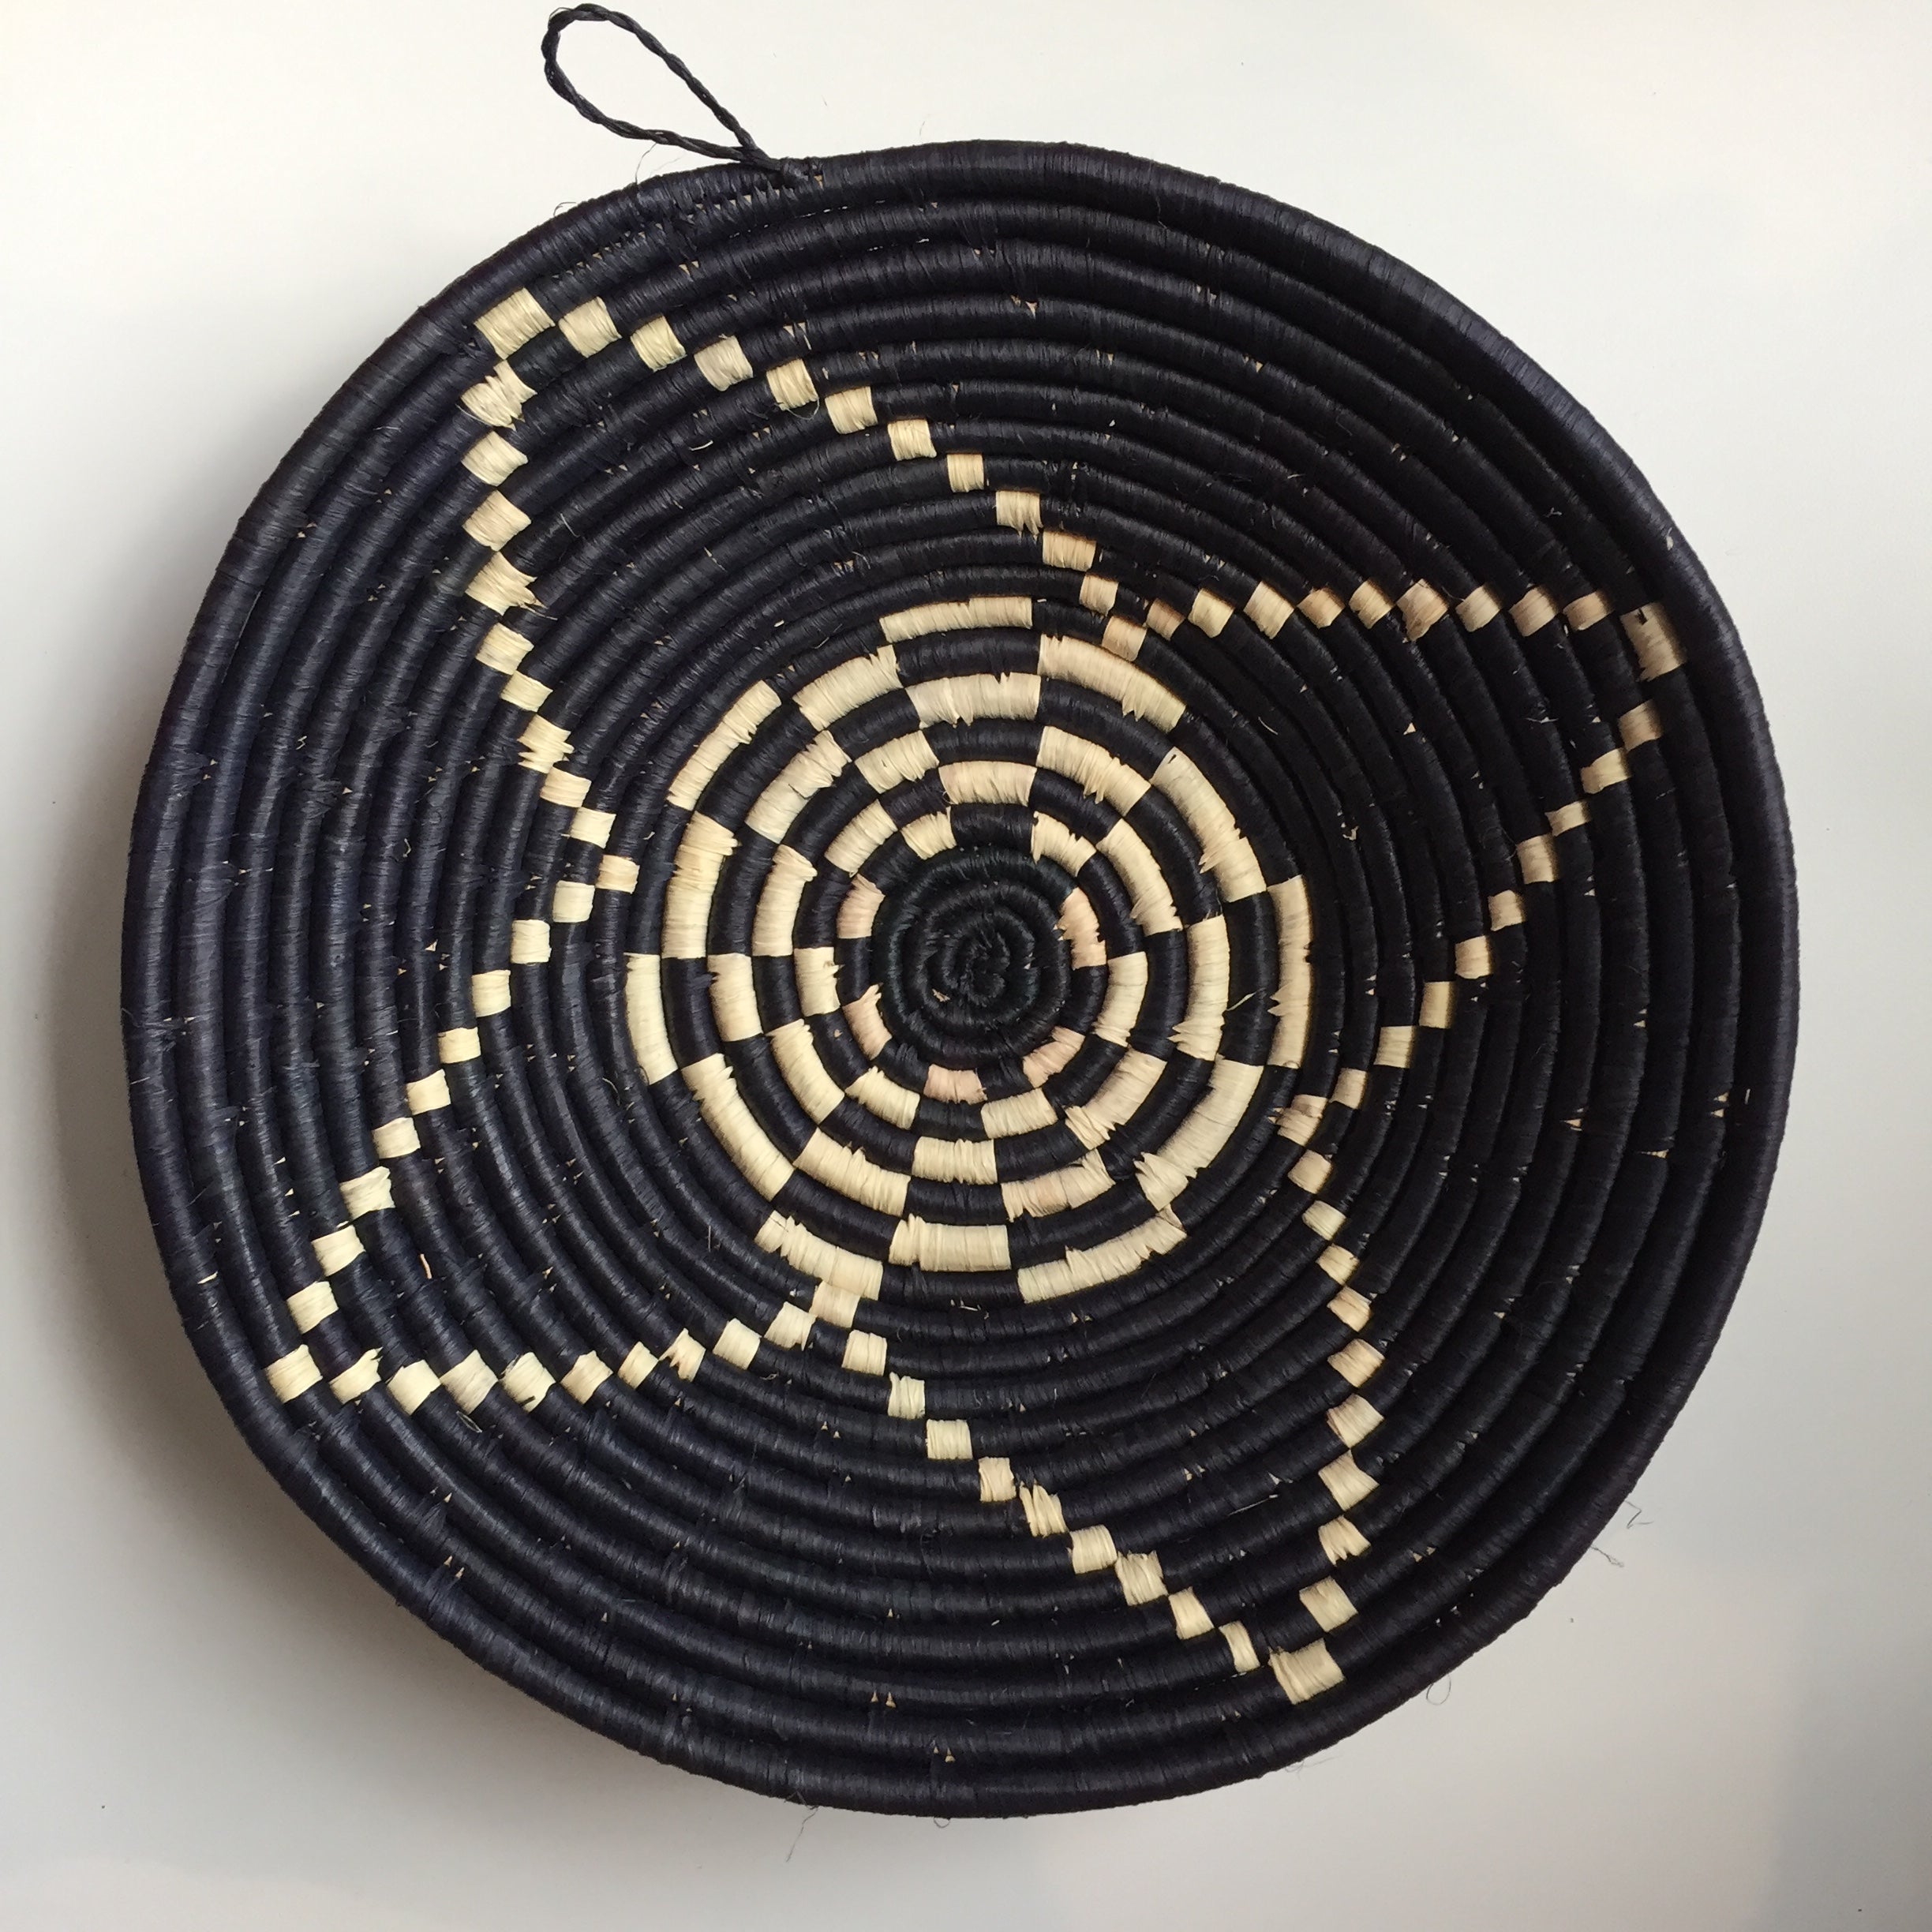 Black and natural flower design woven bowl